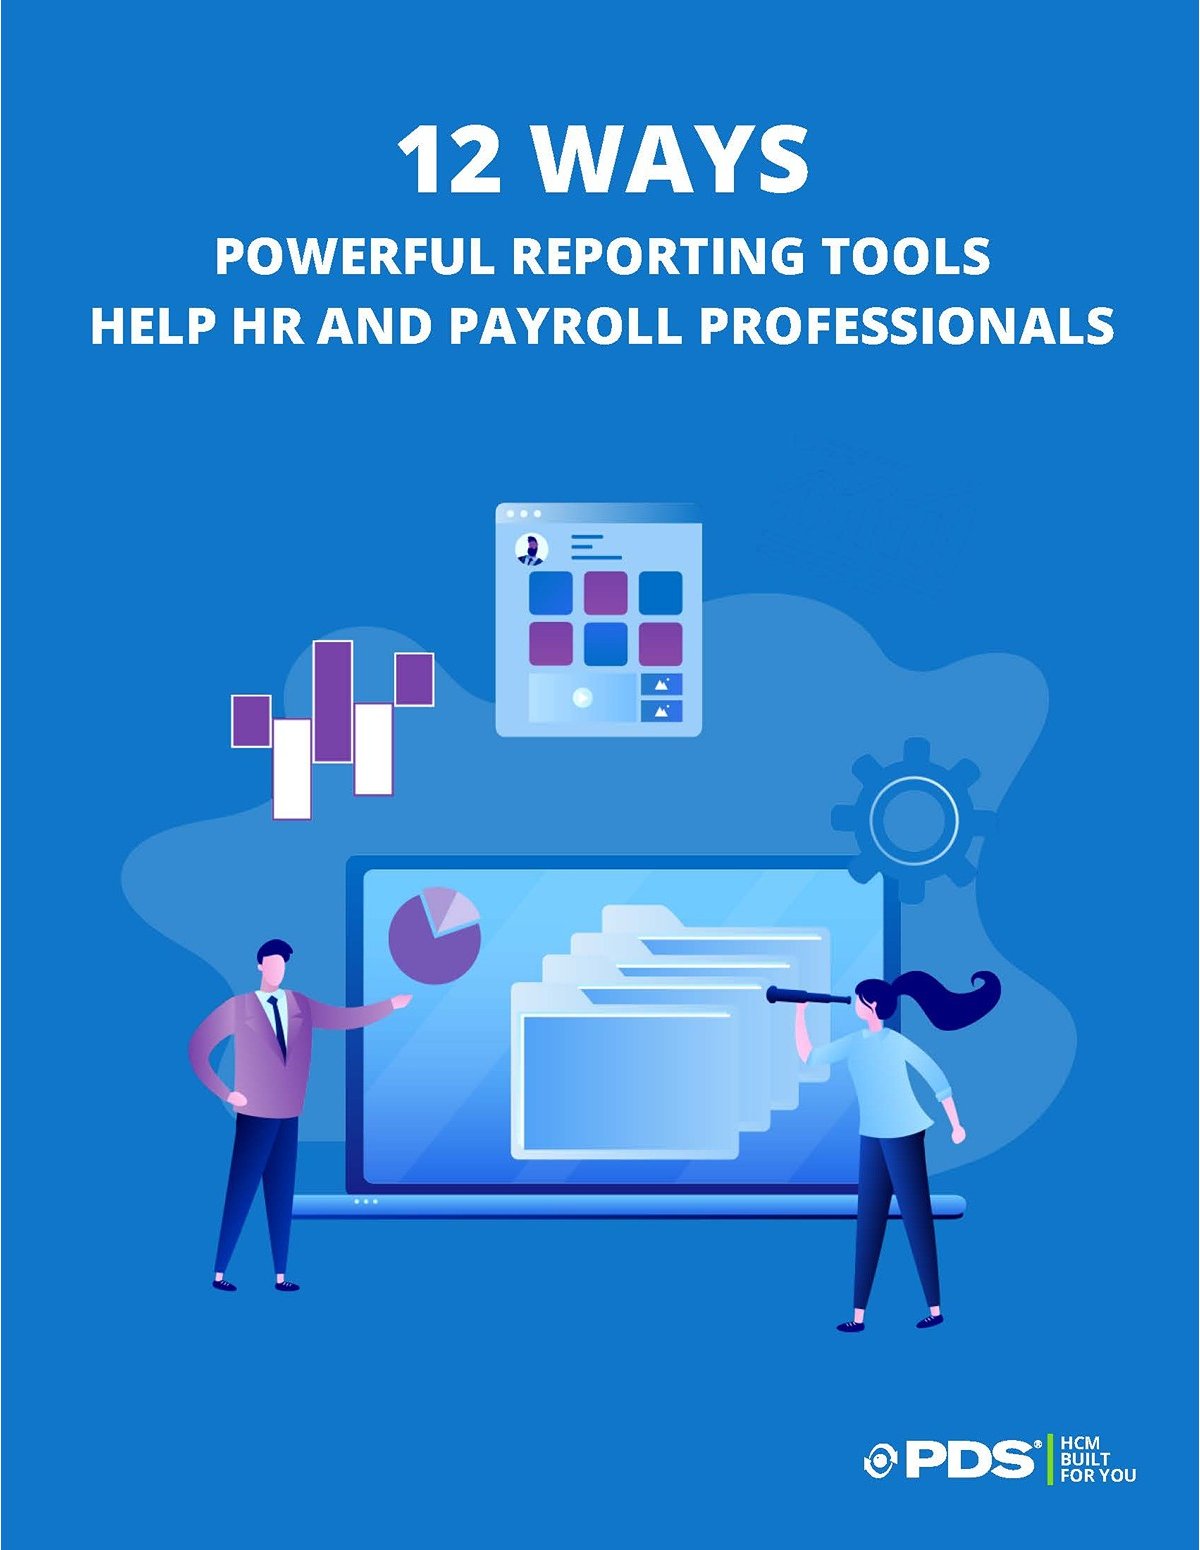 12 Ways Powerful Reporting Tools Help HR and Payroll